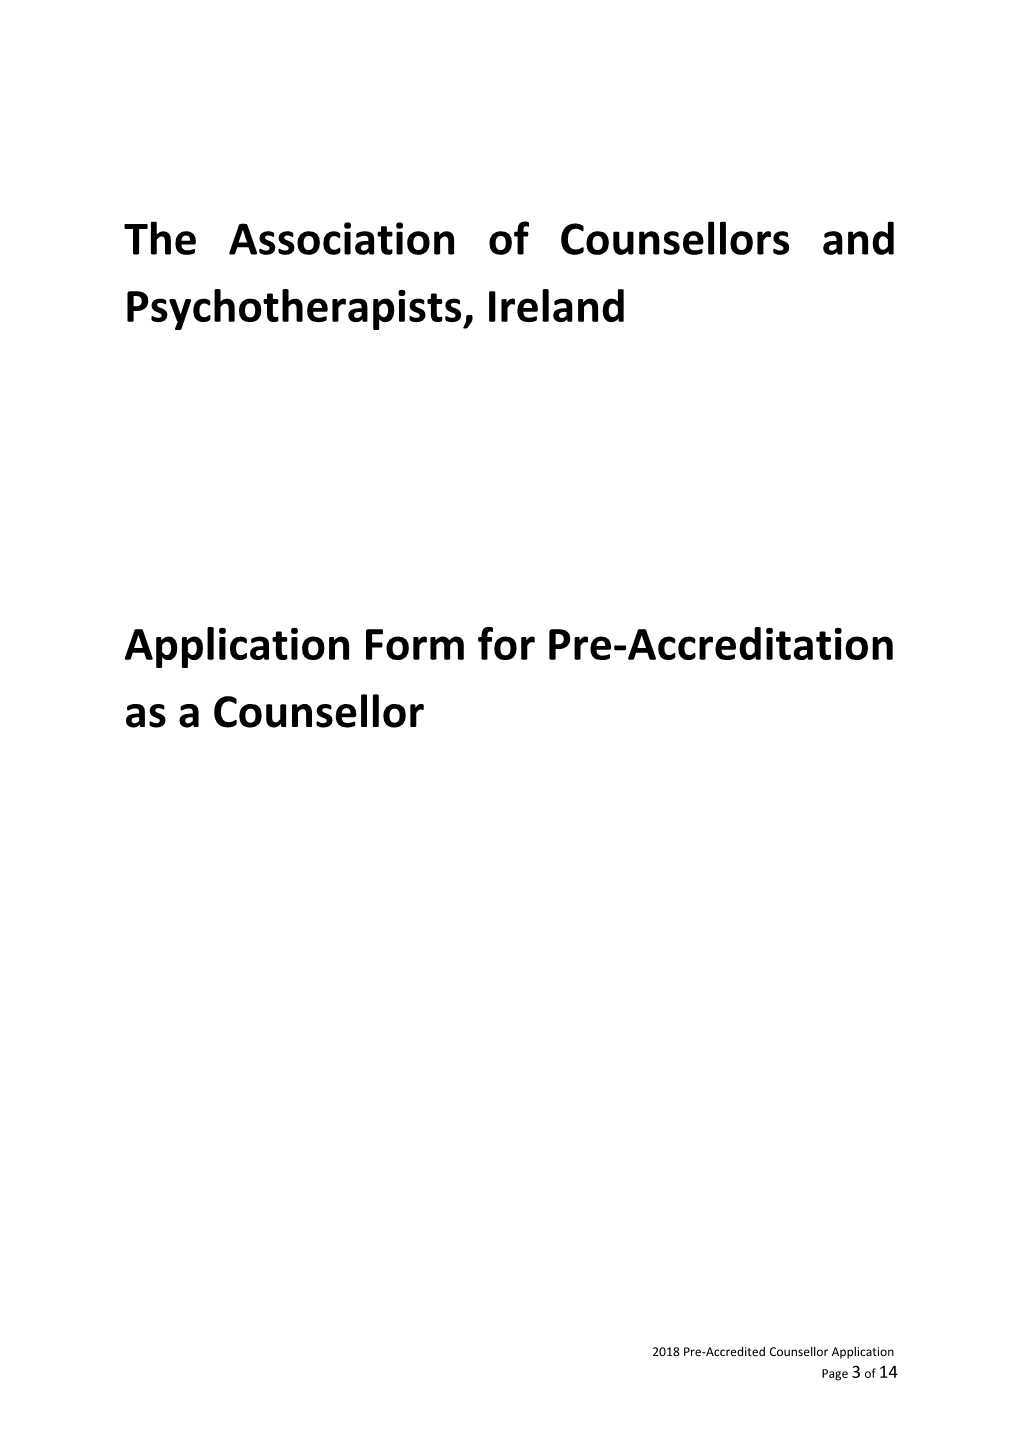 2018Application Form for Pre-Accredited Membership of APCP As a Counsellor